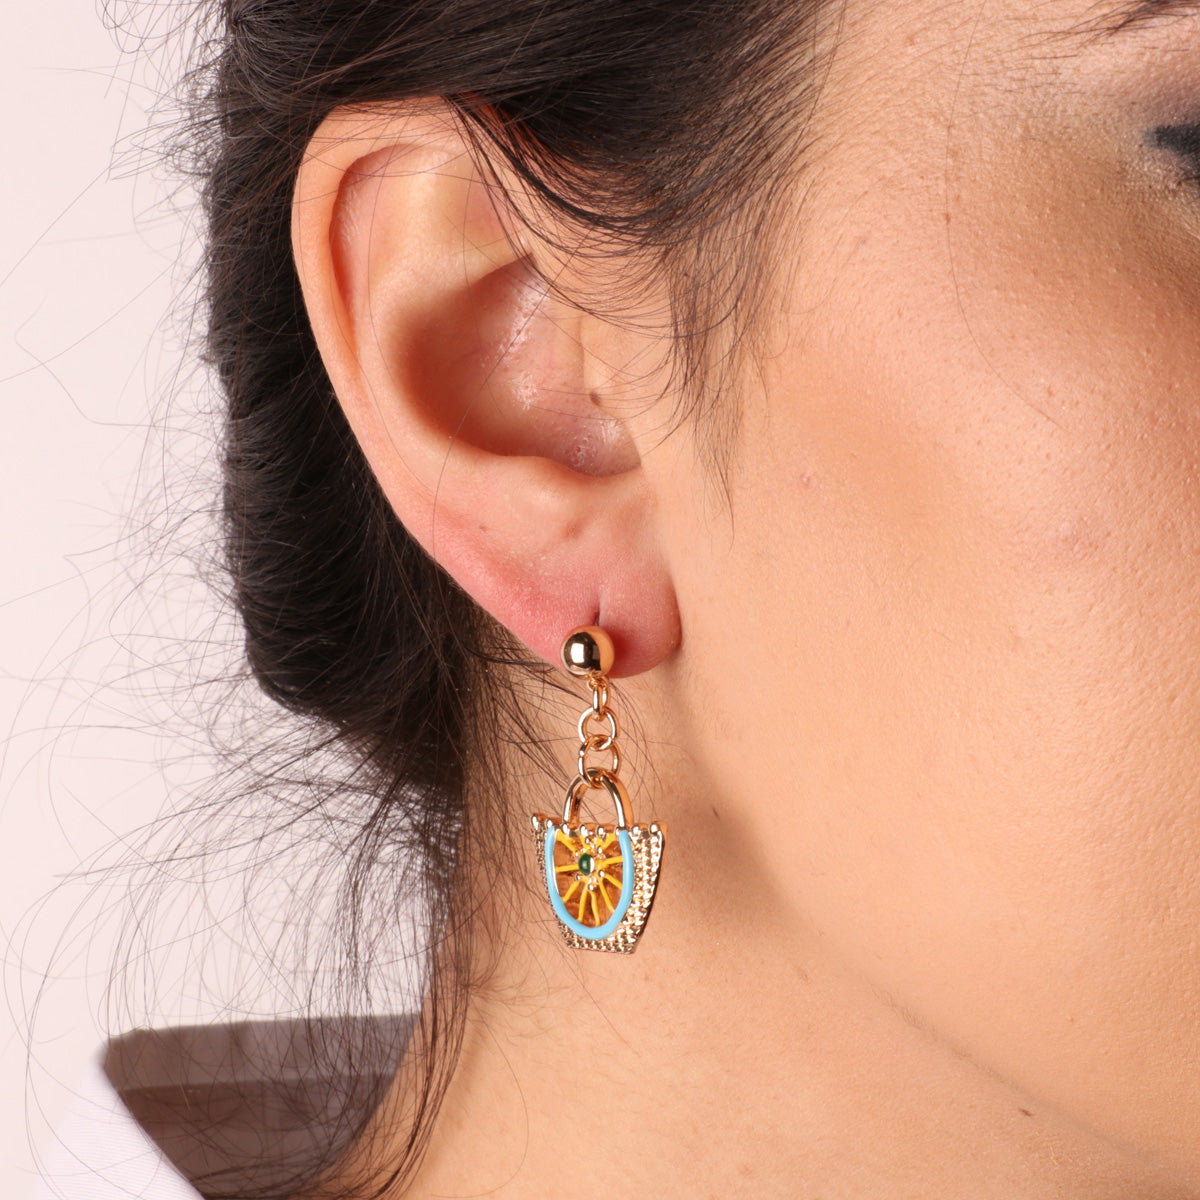 Coffa metal earrings with details in colored glazes